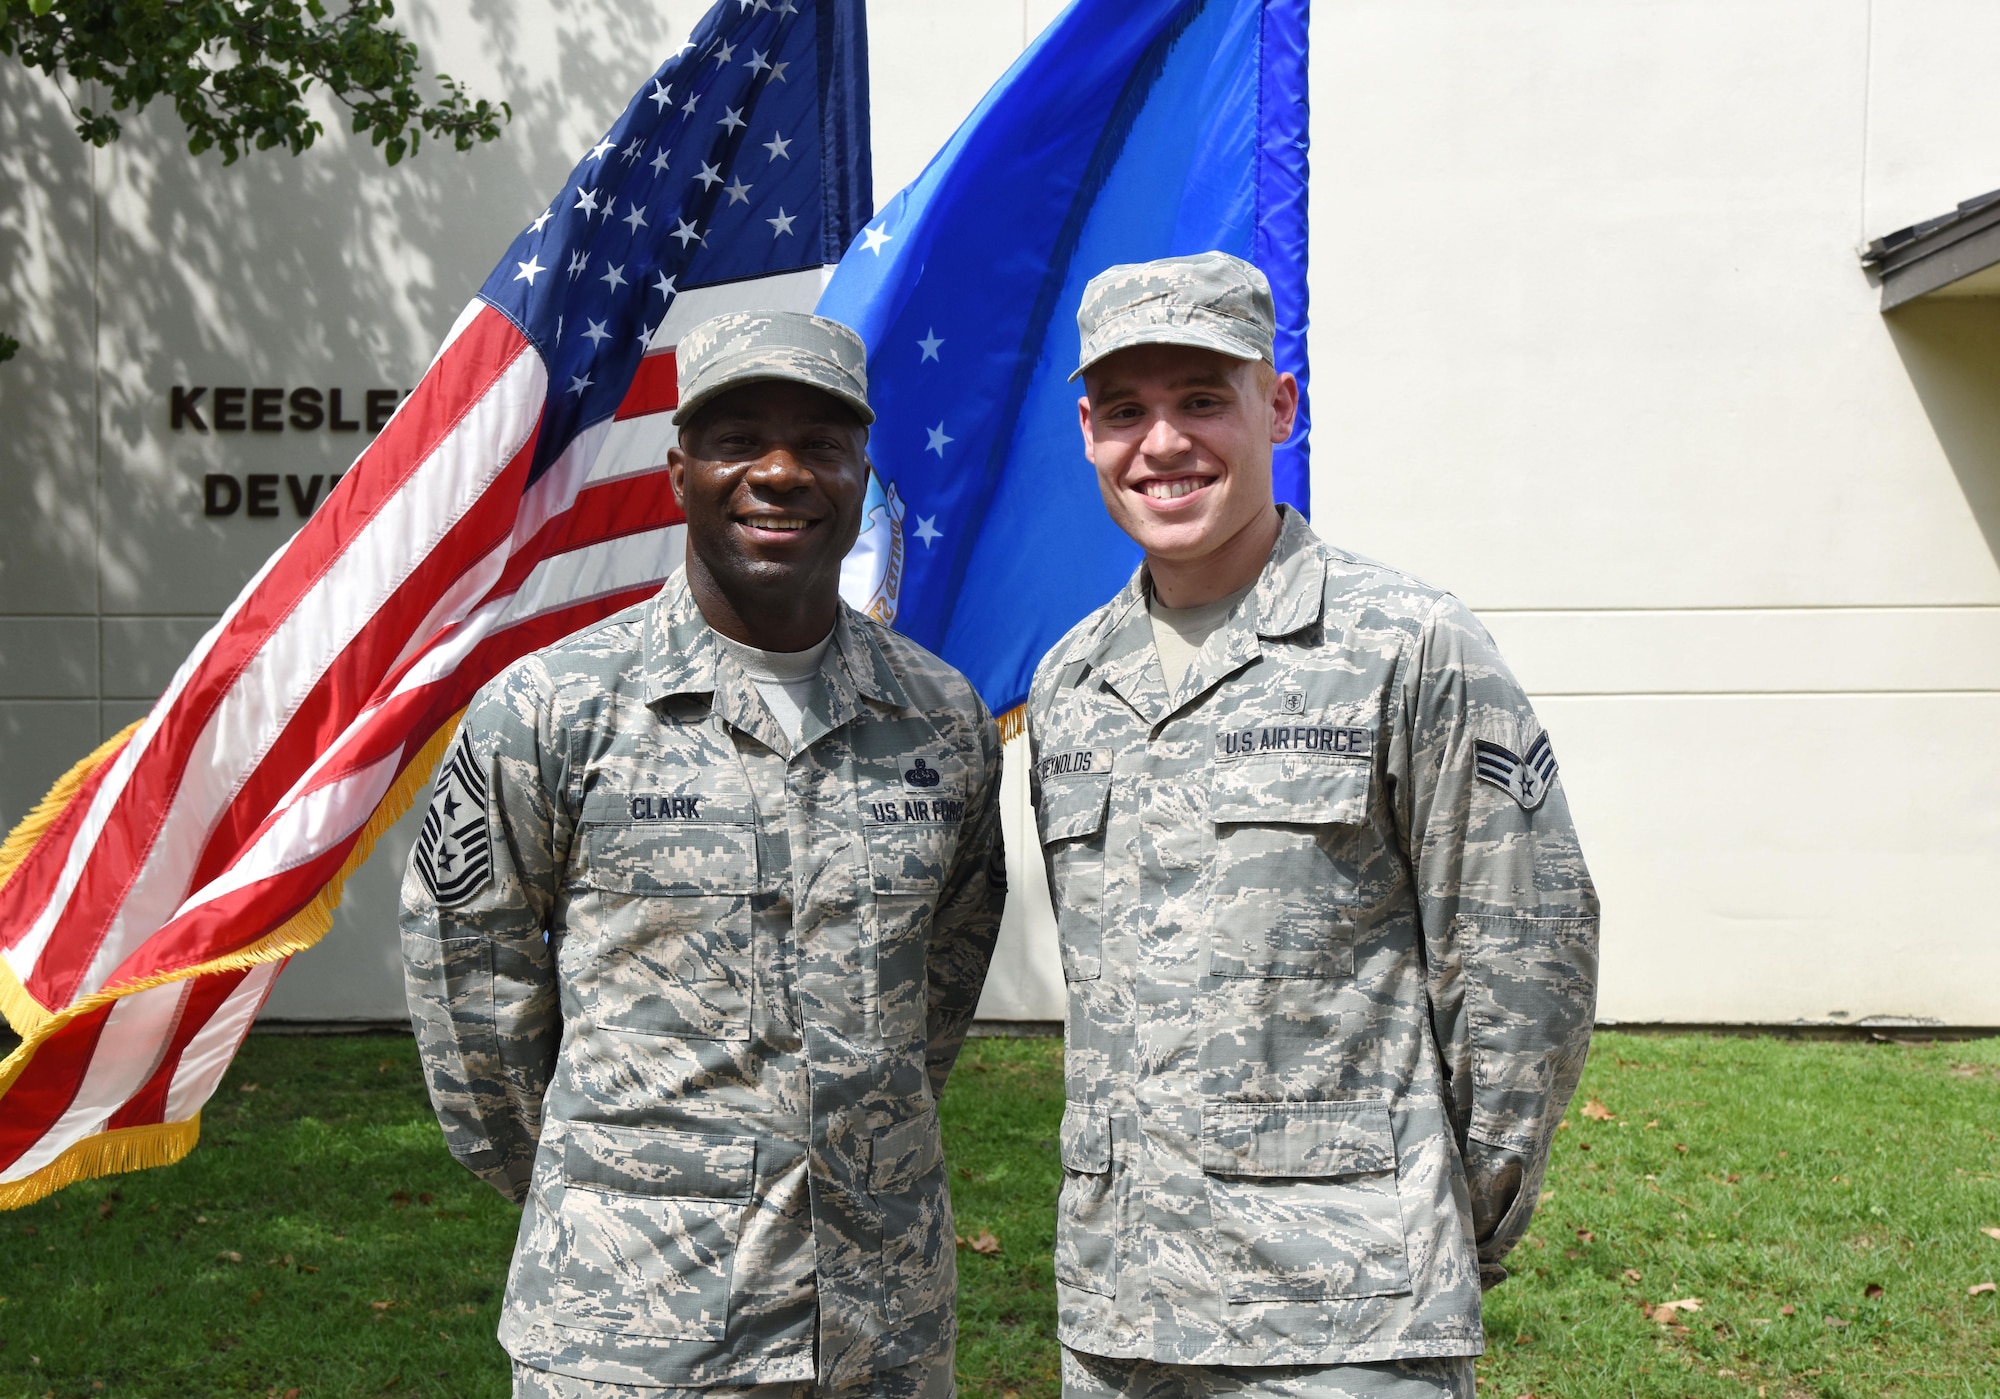 Senior Airman Brandon Reynolds, 81st Surgical Operations Squadron medical technician, poses for a photo with Chief Master Sgt. Vegas Clark, 81st Training Wing command chief, in front of the Professional Development Center May 17, 2017, on Keesler Air Force Base, Miss. He participated in the Command Chief for a Day program, which highlights outstanding enlisted performers from around the wing. Each Airman selected for the program spends a day shadowing Clark to learn what it takes to be a command chief. (U.S. Air Force photo by Kemberly Groue)

